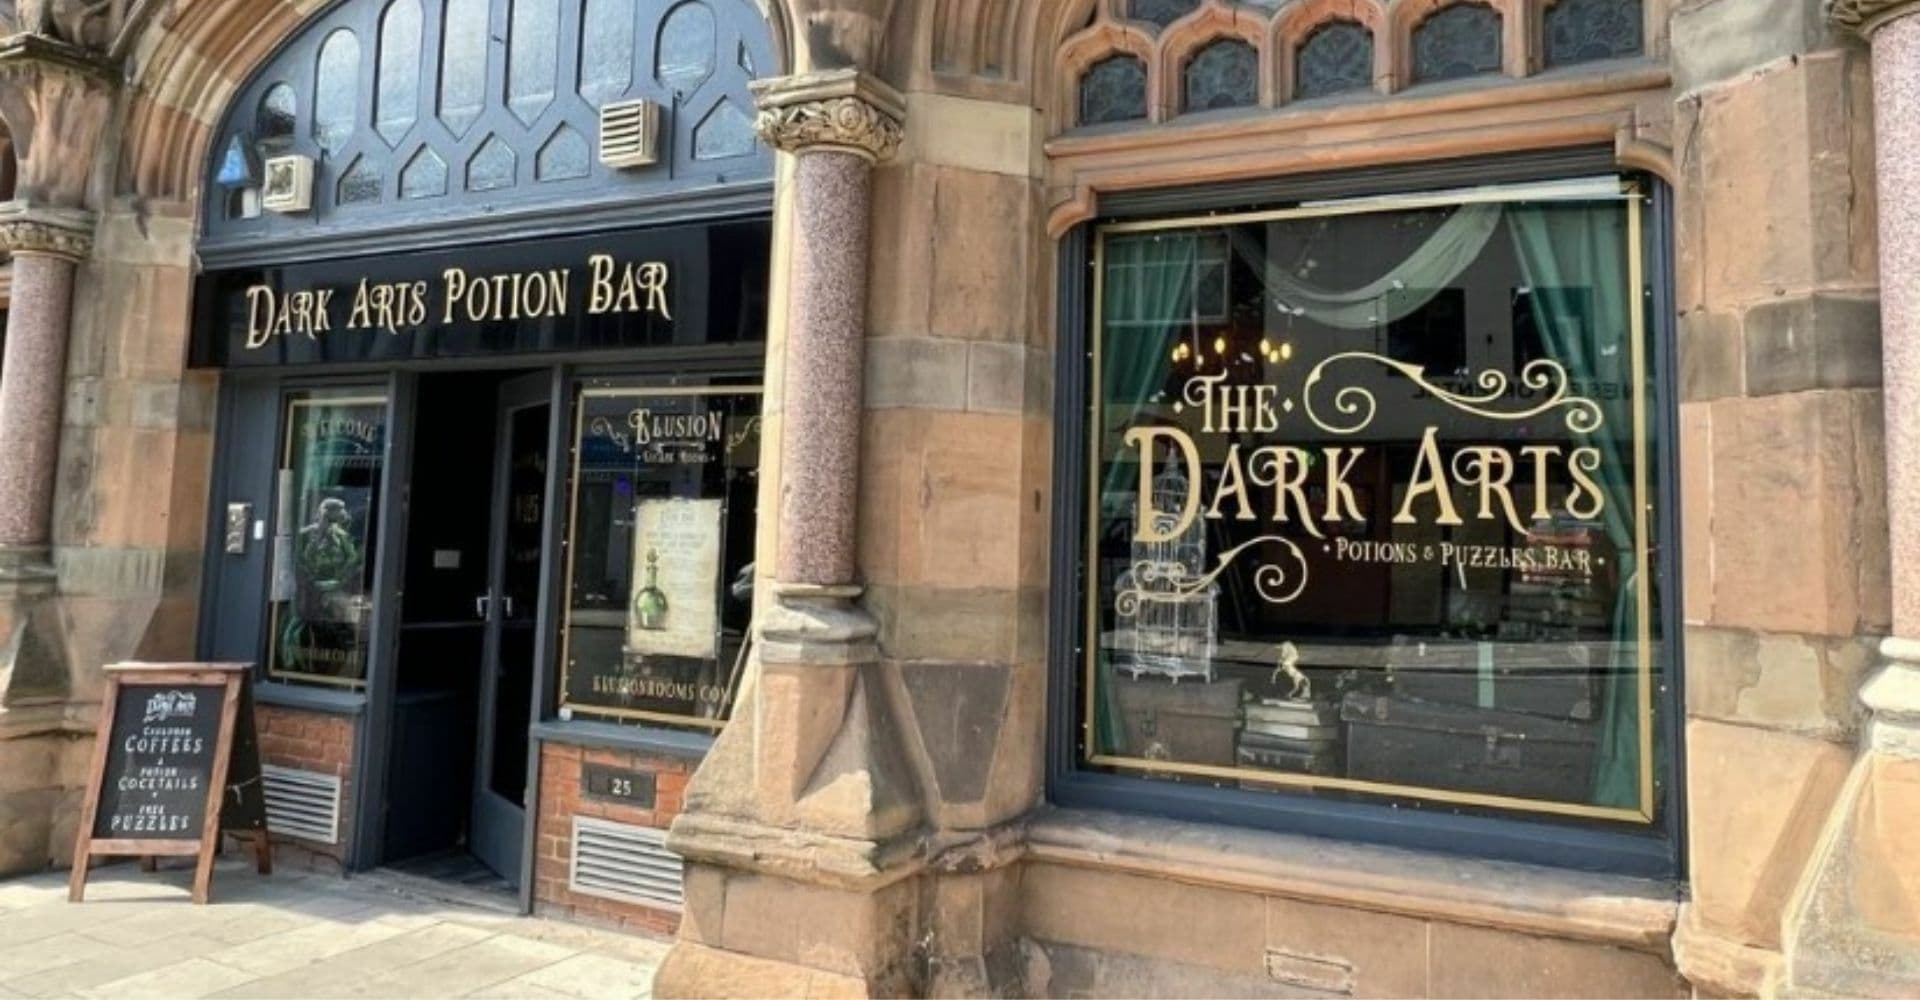 Exterior of The Dark Arts Potions and Puzzle Bar